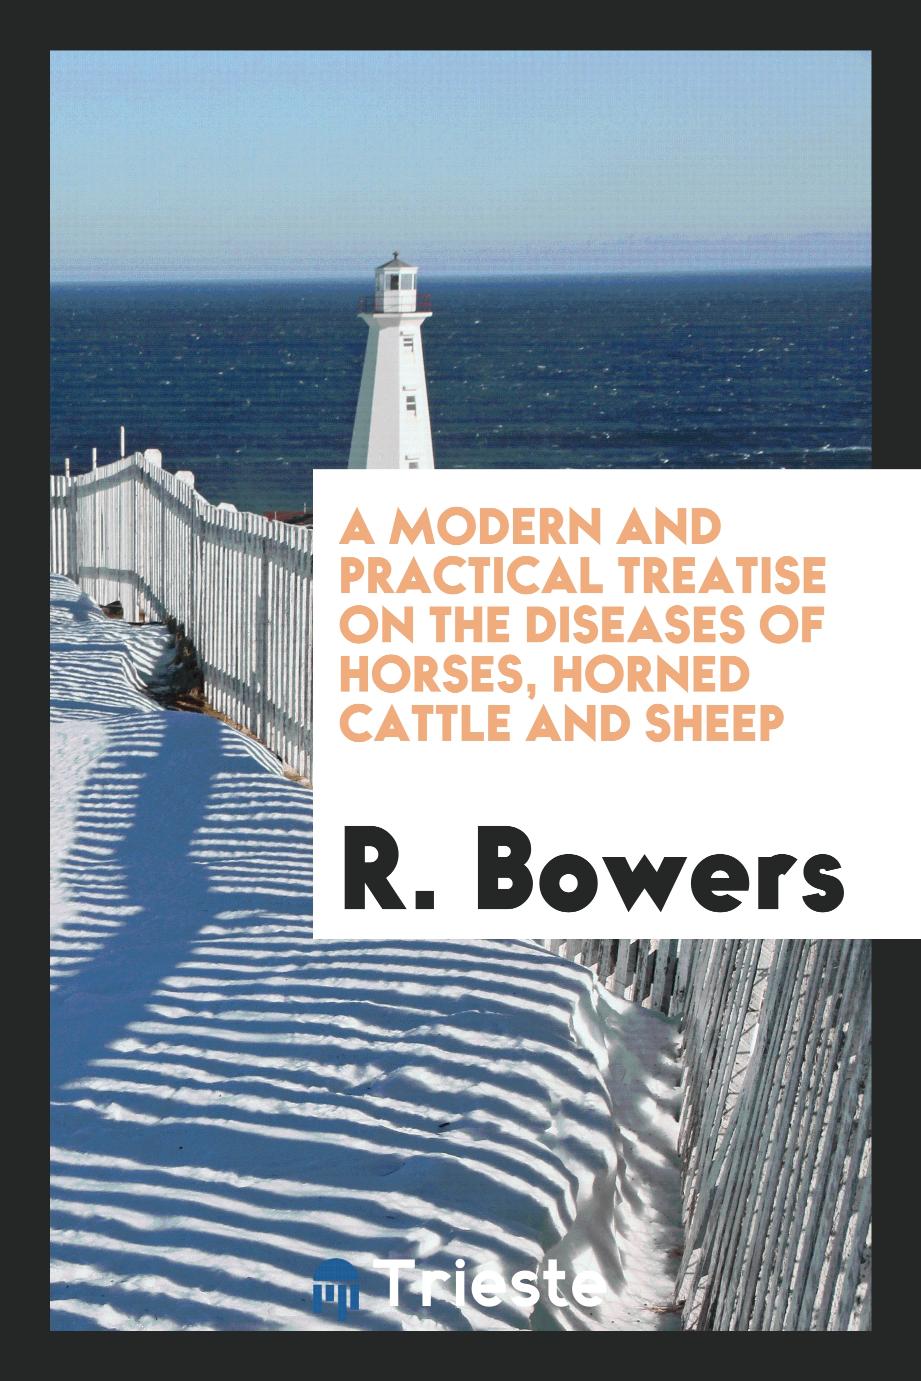 A Modern and Practical Treatise on the Diseases of Horses, Horned Cattle and Sheep